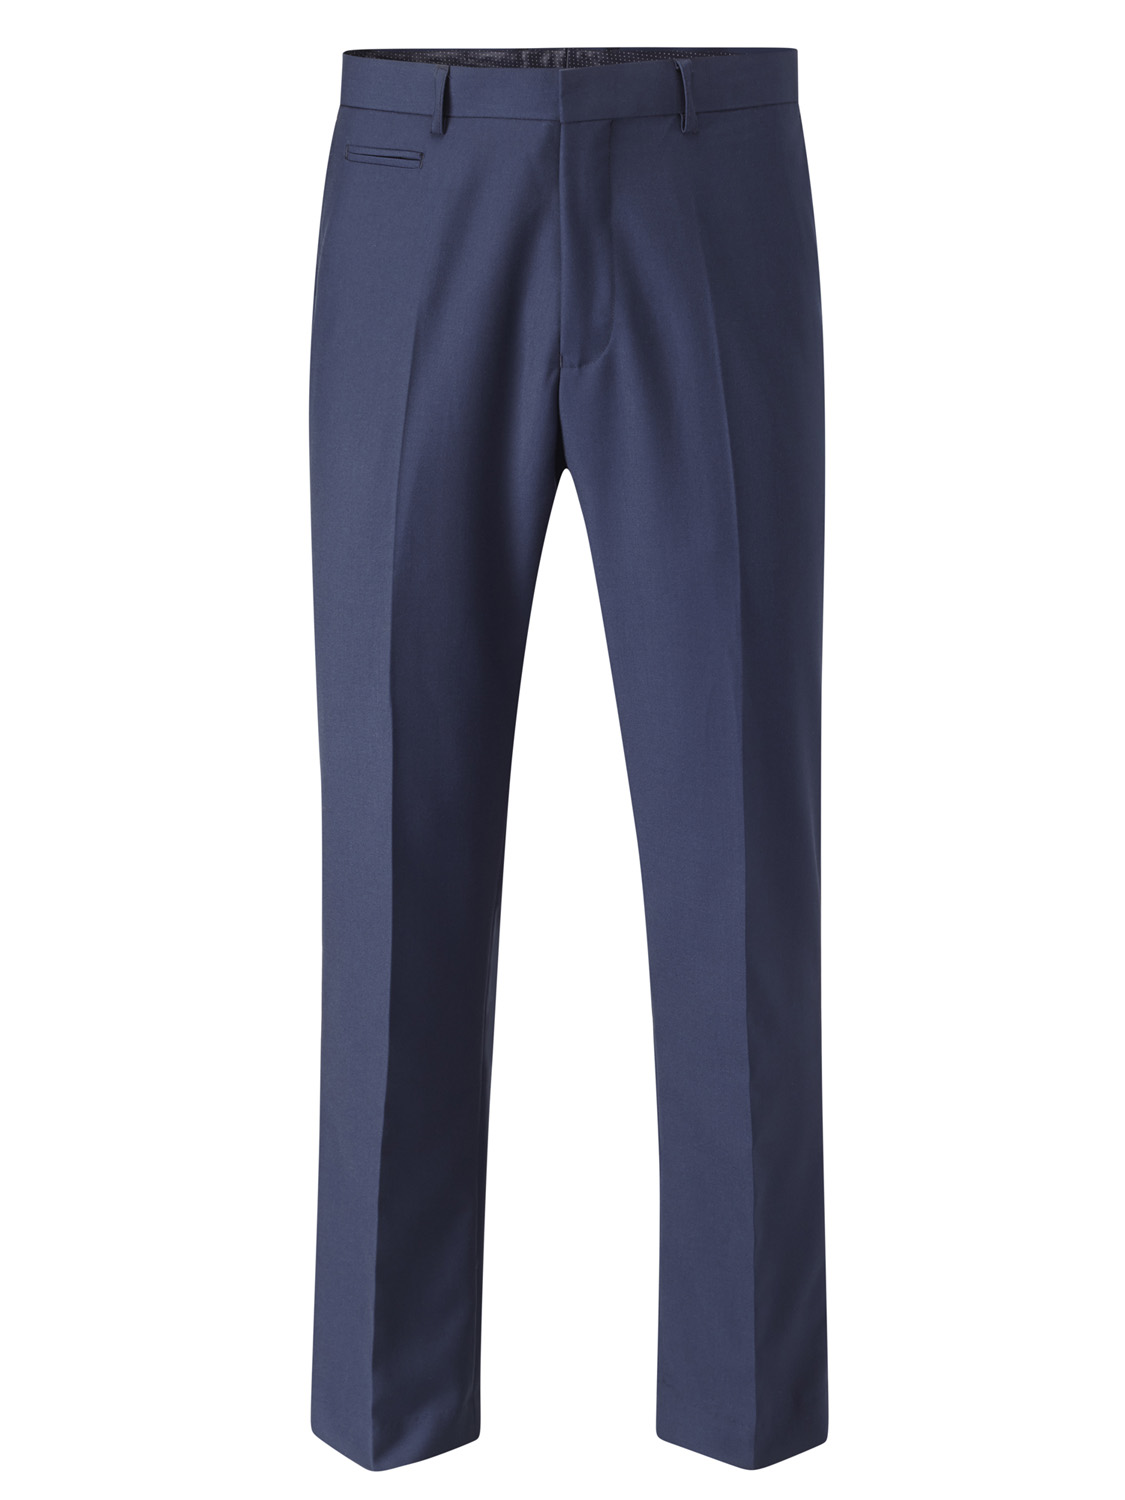 Kennedy Royale Blue 3 Piece Suit - Tom Murphy's Formal and Menswear